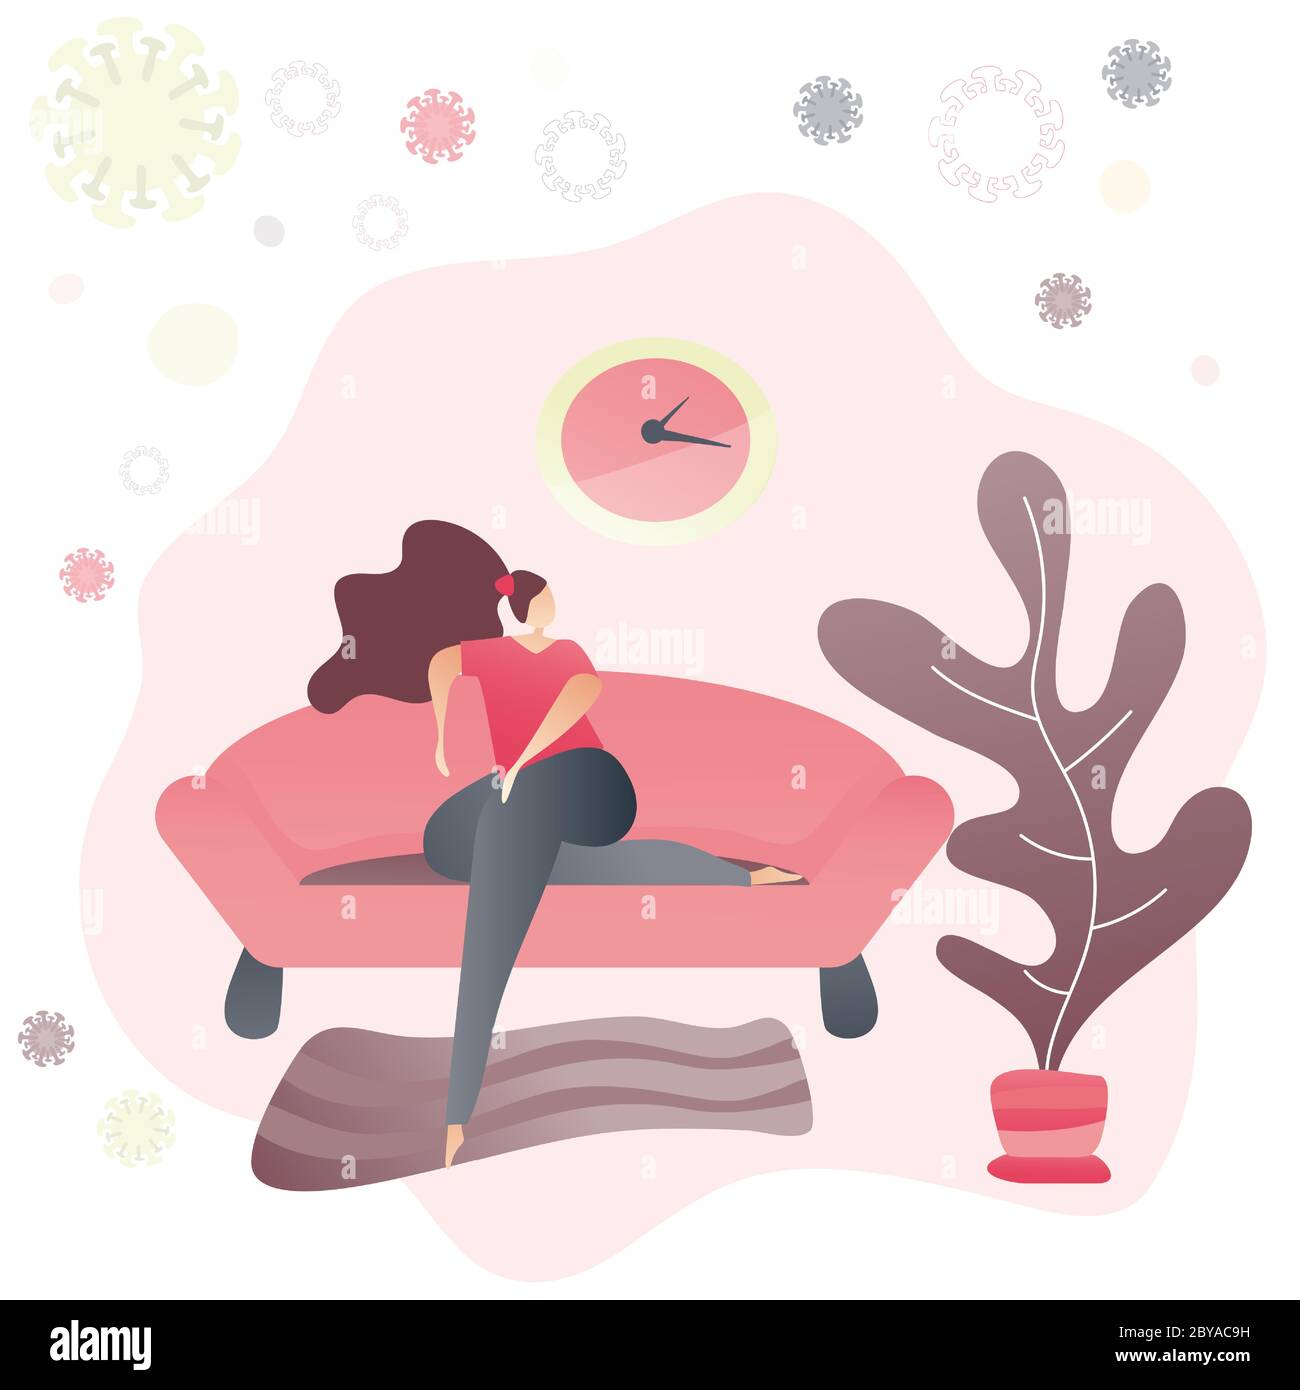 Woman sitting on a sofa and relaxing during Coronavirus epidemic. Stay home and self isolation concept. Positive thoughts and precautions. Vector illu Stock Vector